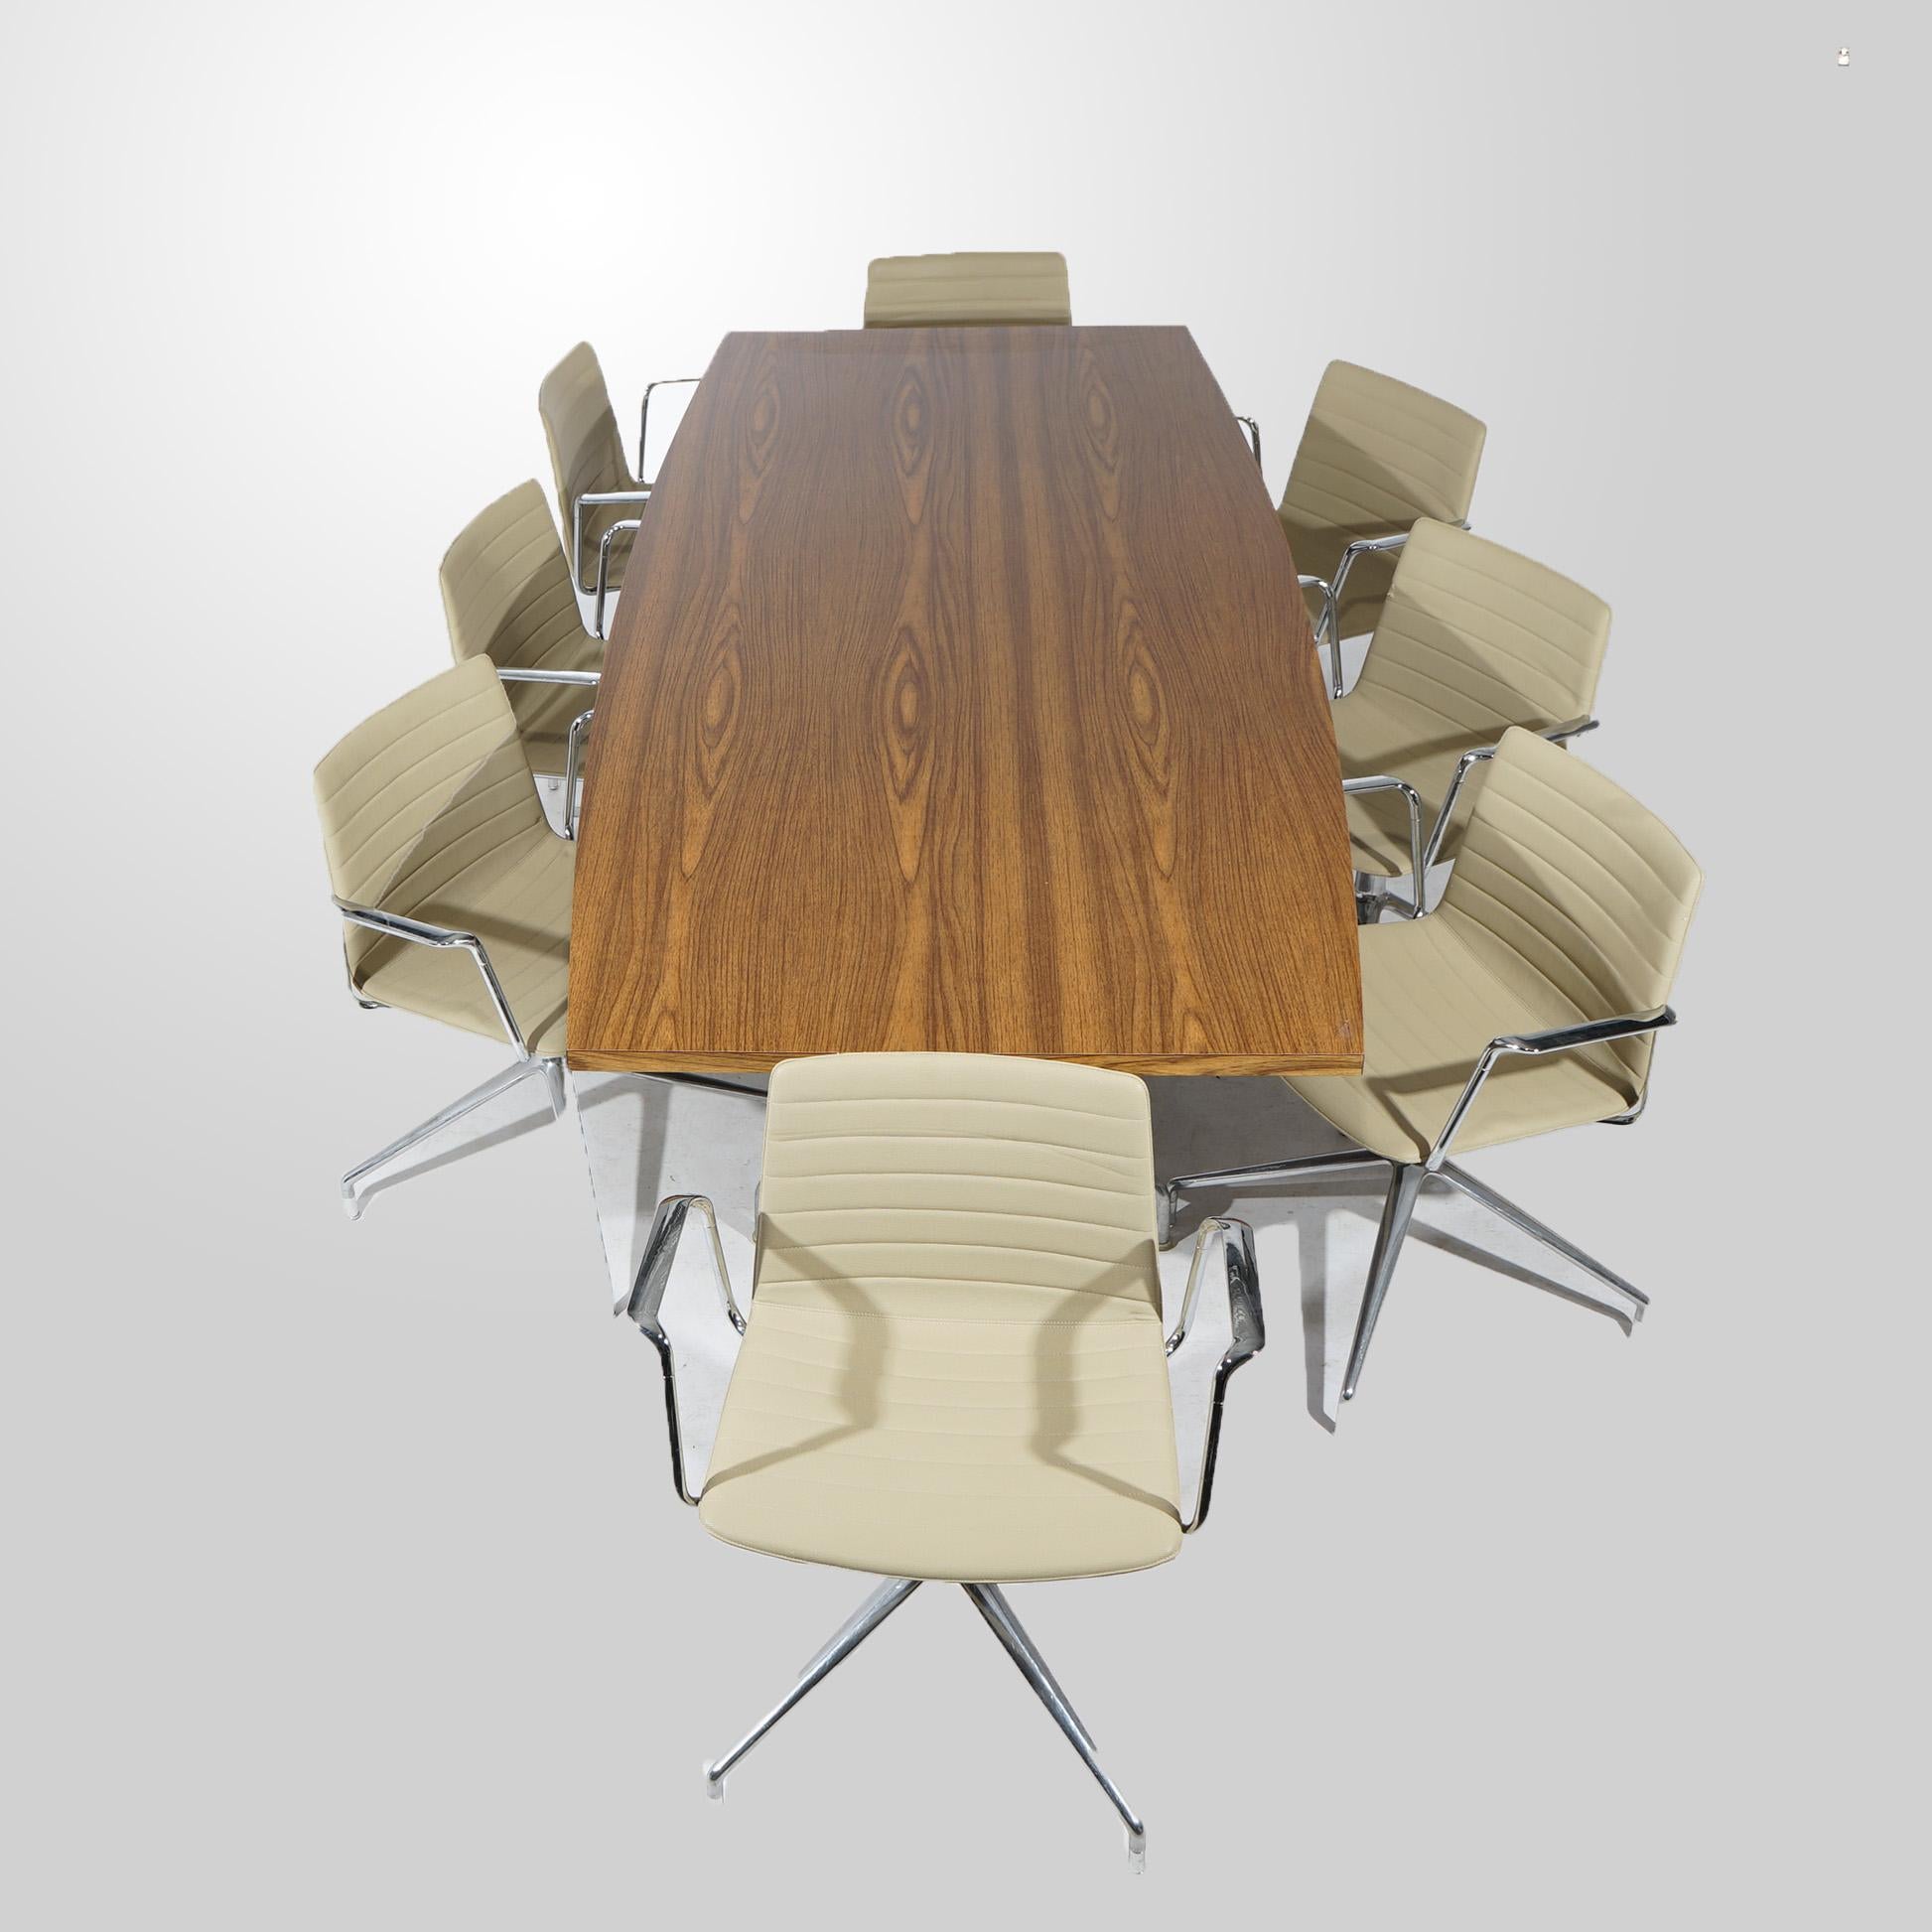 A Mid-Century Modern Eames for Miller dining or conference table offers laminated top raised on double aluminum pedestal legs; set of eight swivel Flex chairs by Piergiorgio Cazzaniga for Andreu World in the manner of Eames for Miller offer ribbed